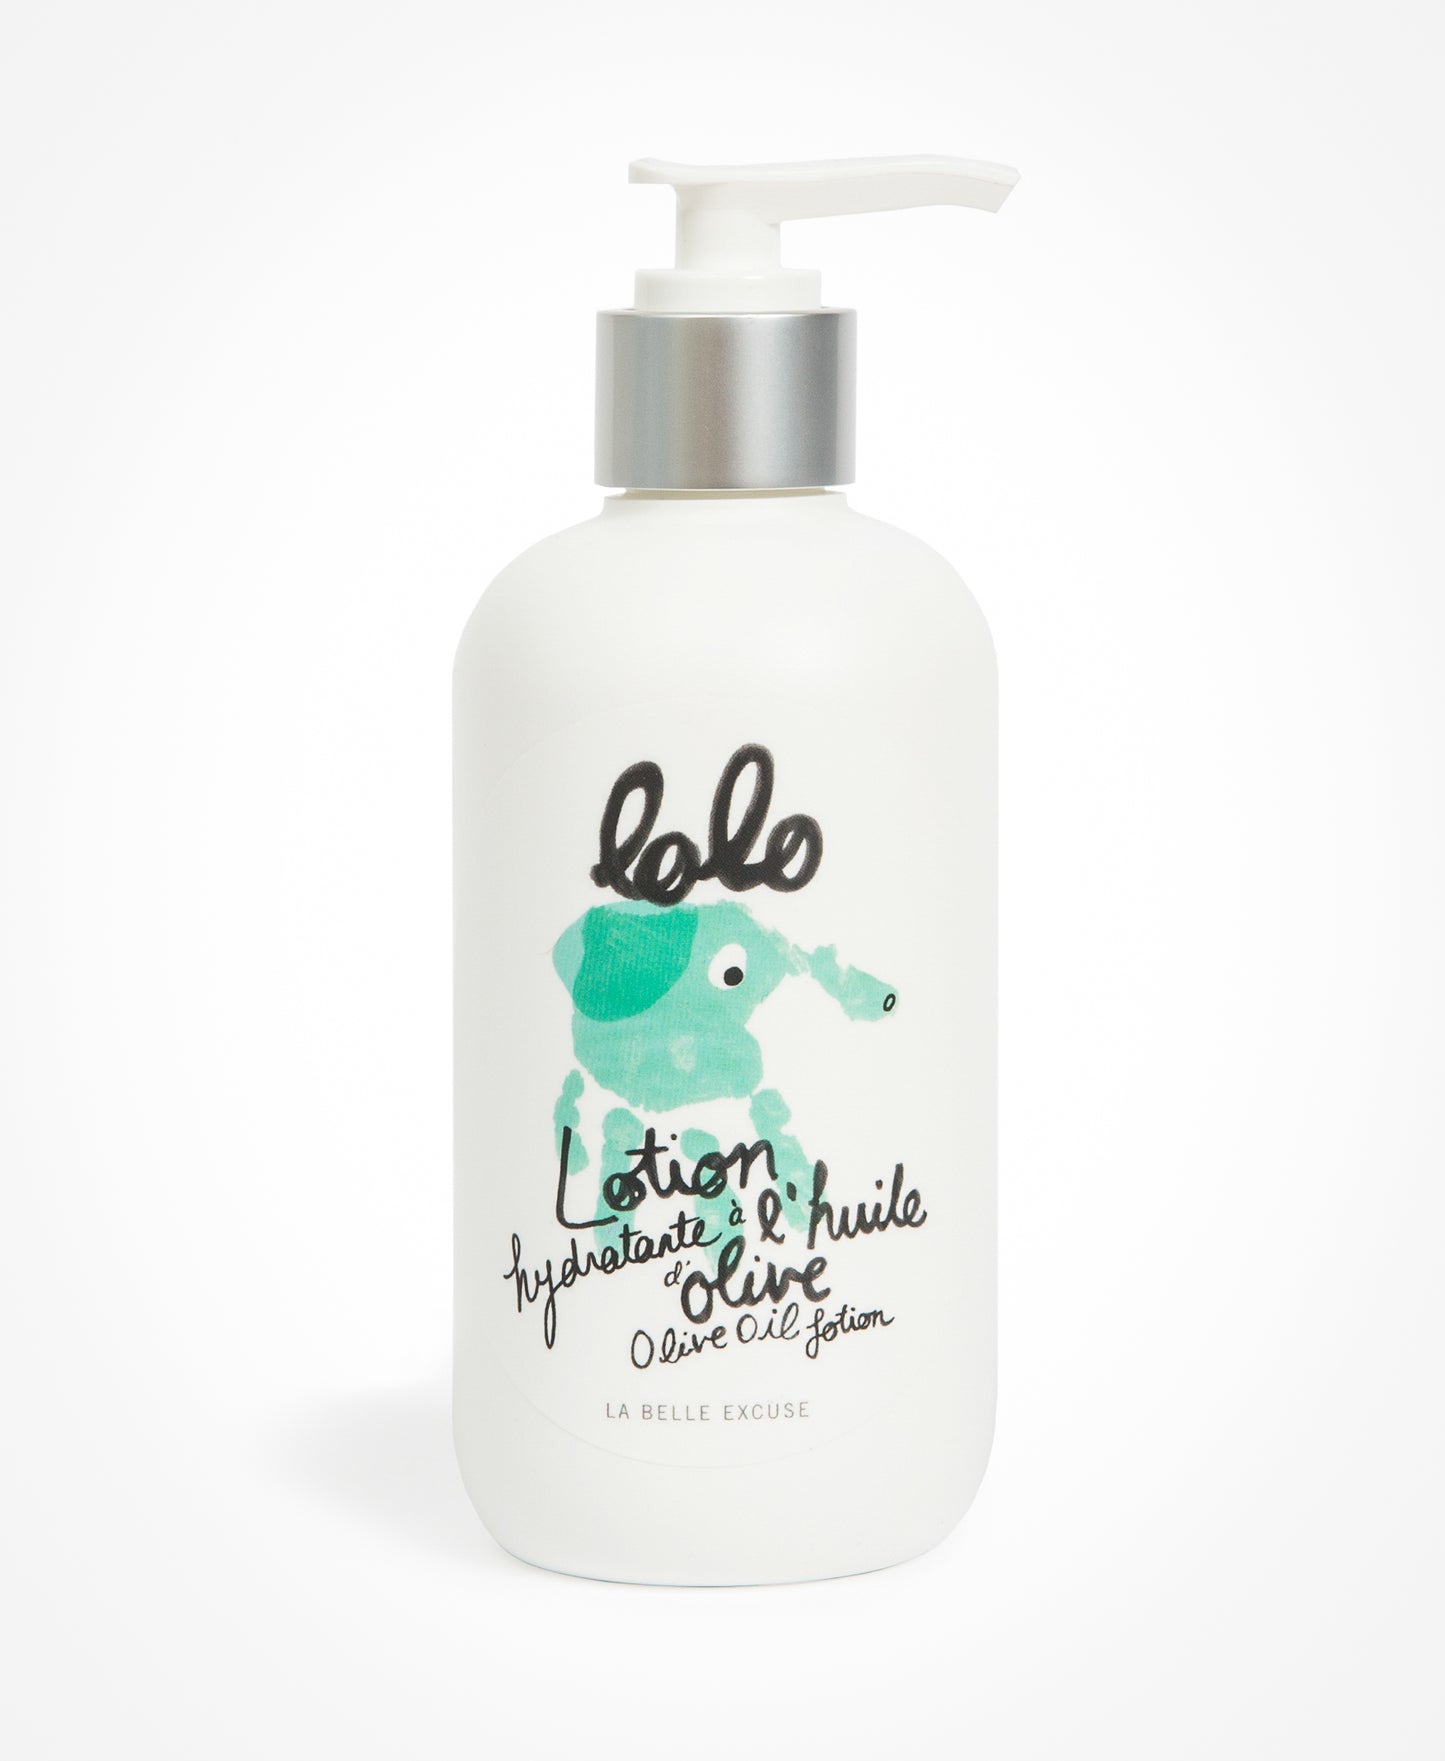 Olive Oil Lotion LOLO